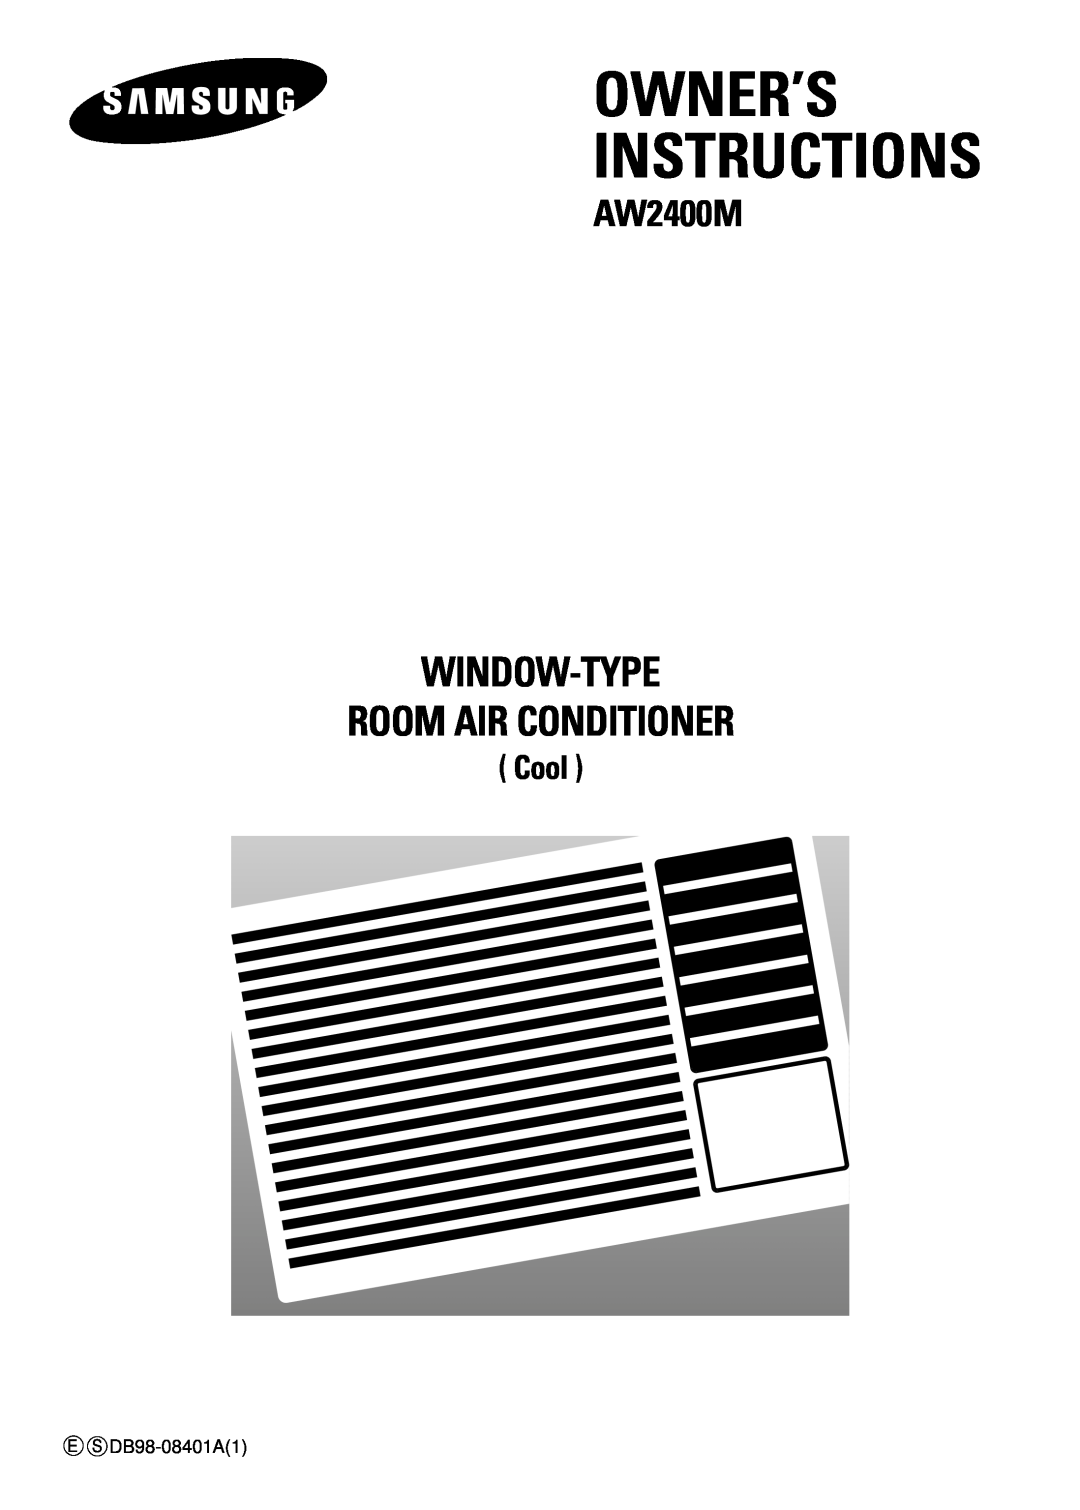 Samsung AW2400M manual Owner’S Instructions, Window-Type Room Air Conditioner, Cool 